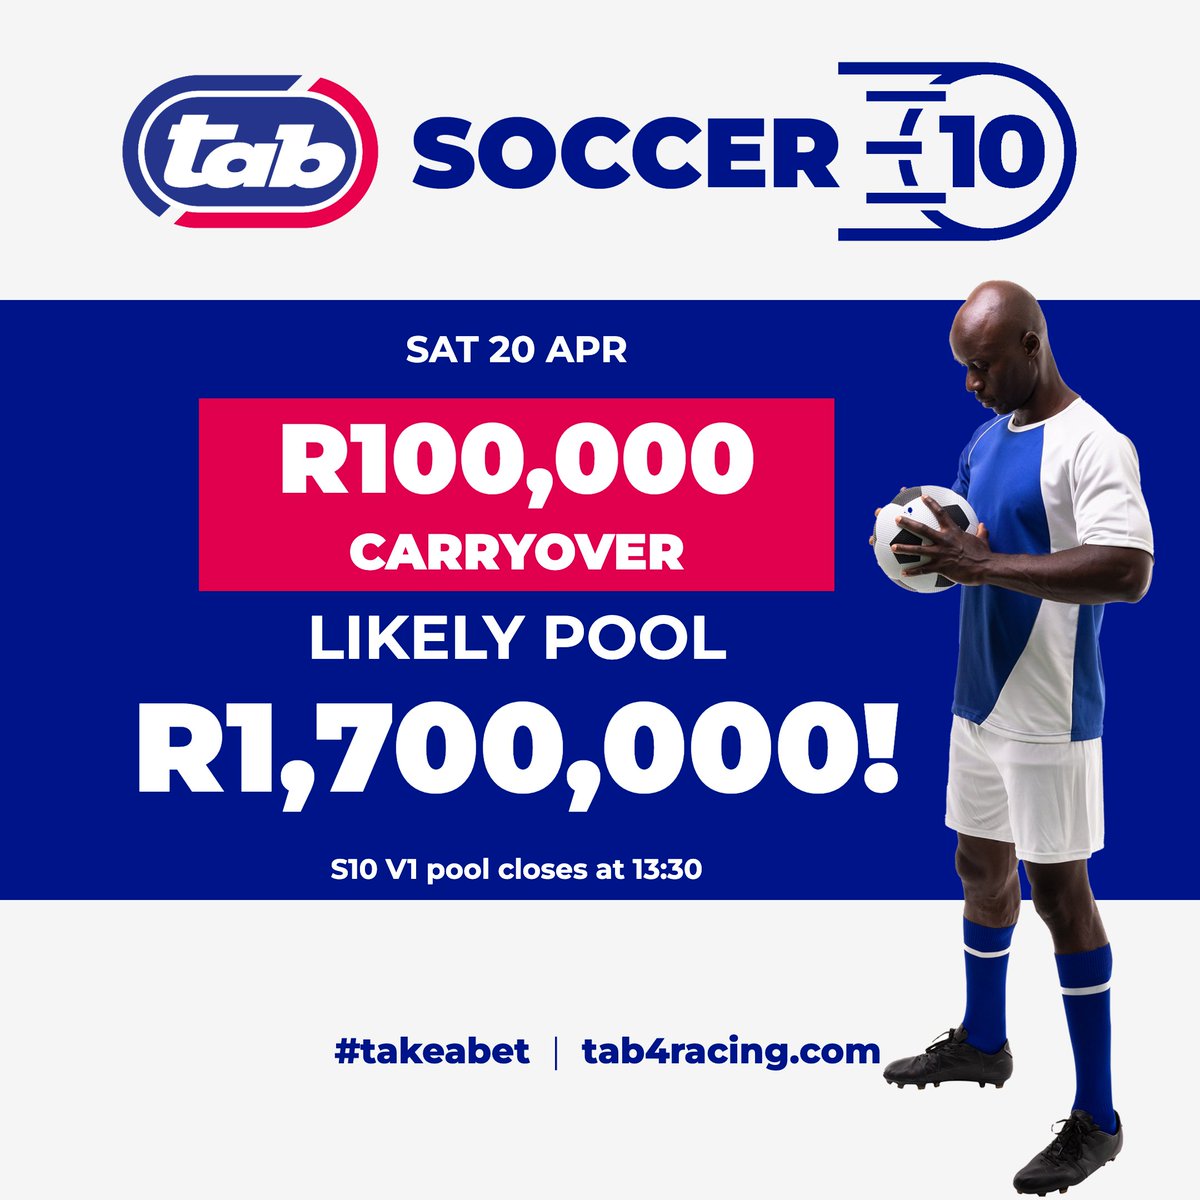 Time to lace up those boots and score big with Soccer10 V1, where you could net a whopping R1 7million jackpot, including a R100,000 Carryover up for grabs! 
 
The pool closes on Saturday at 13:30— don't be a benchwarmer, join the game and let's kick off the excitement! ⚽💰